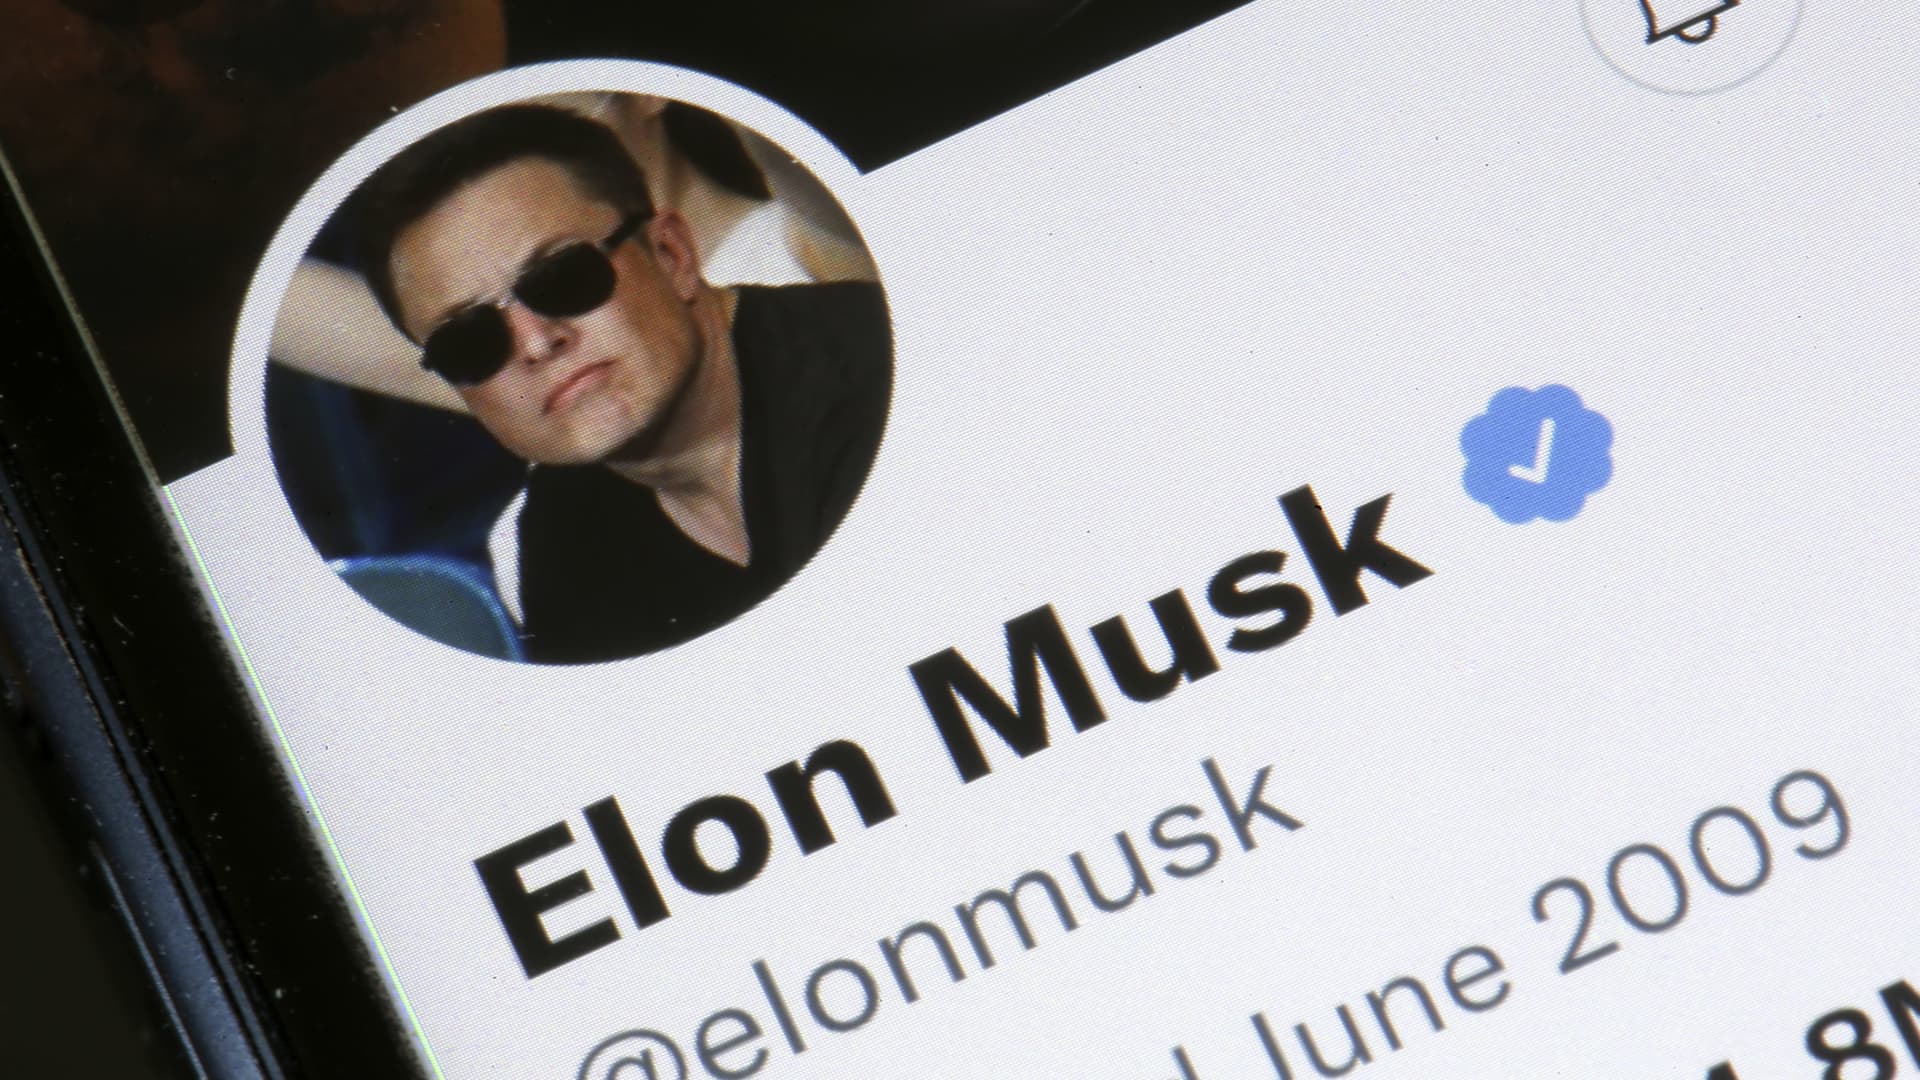 Elon Musk just bought Twitter. Now what? – CNBC